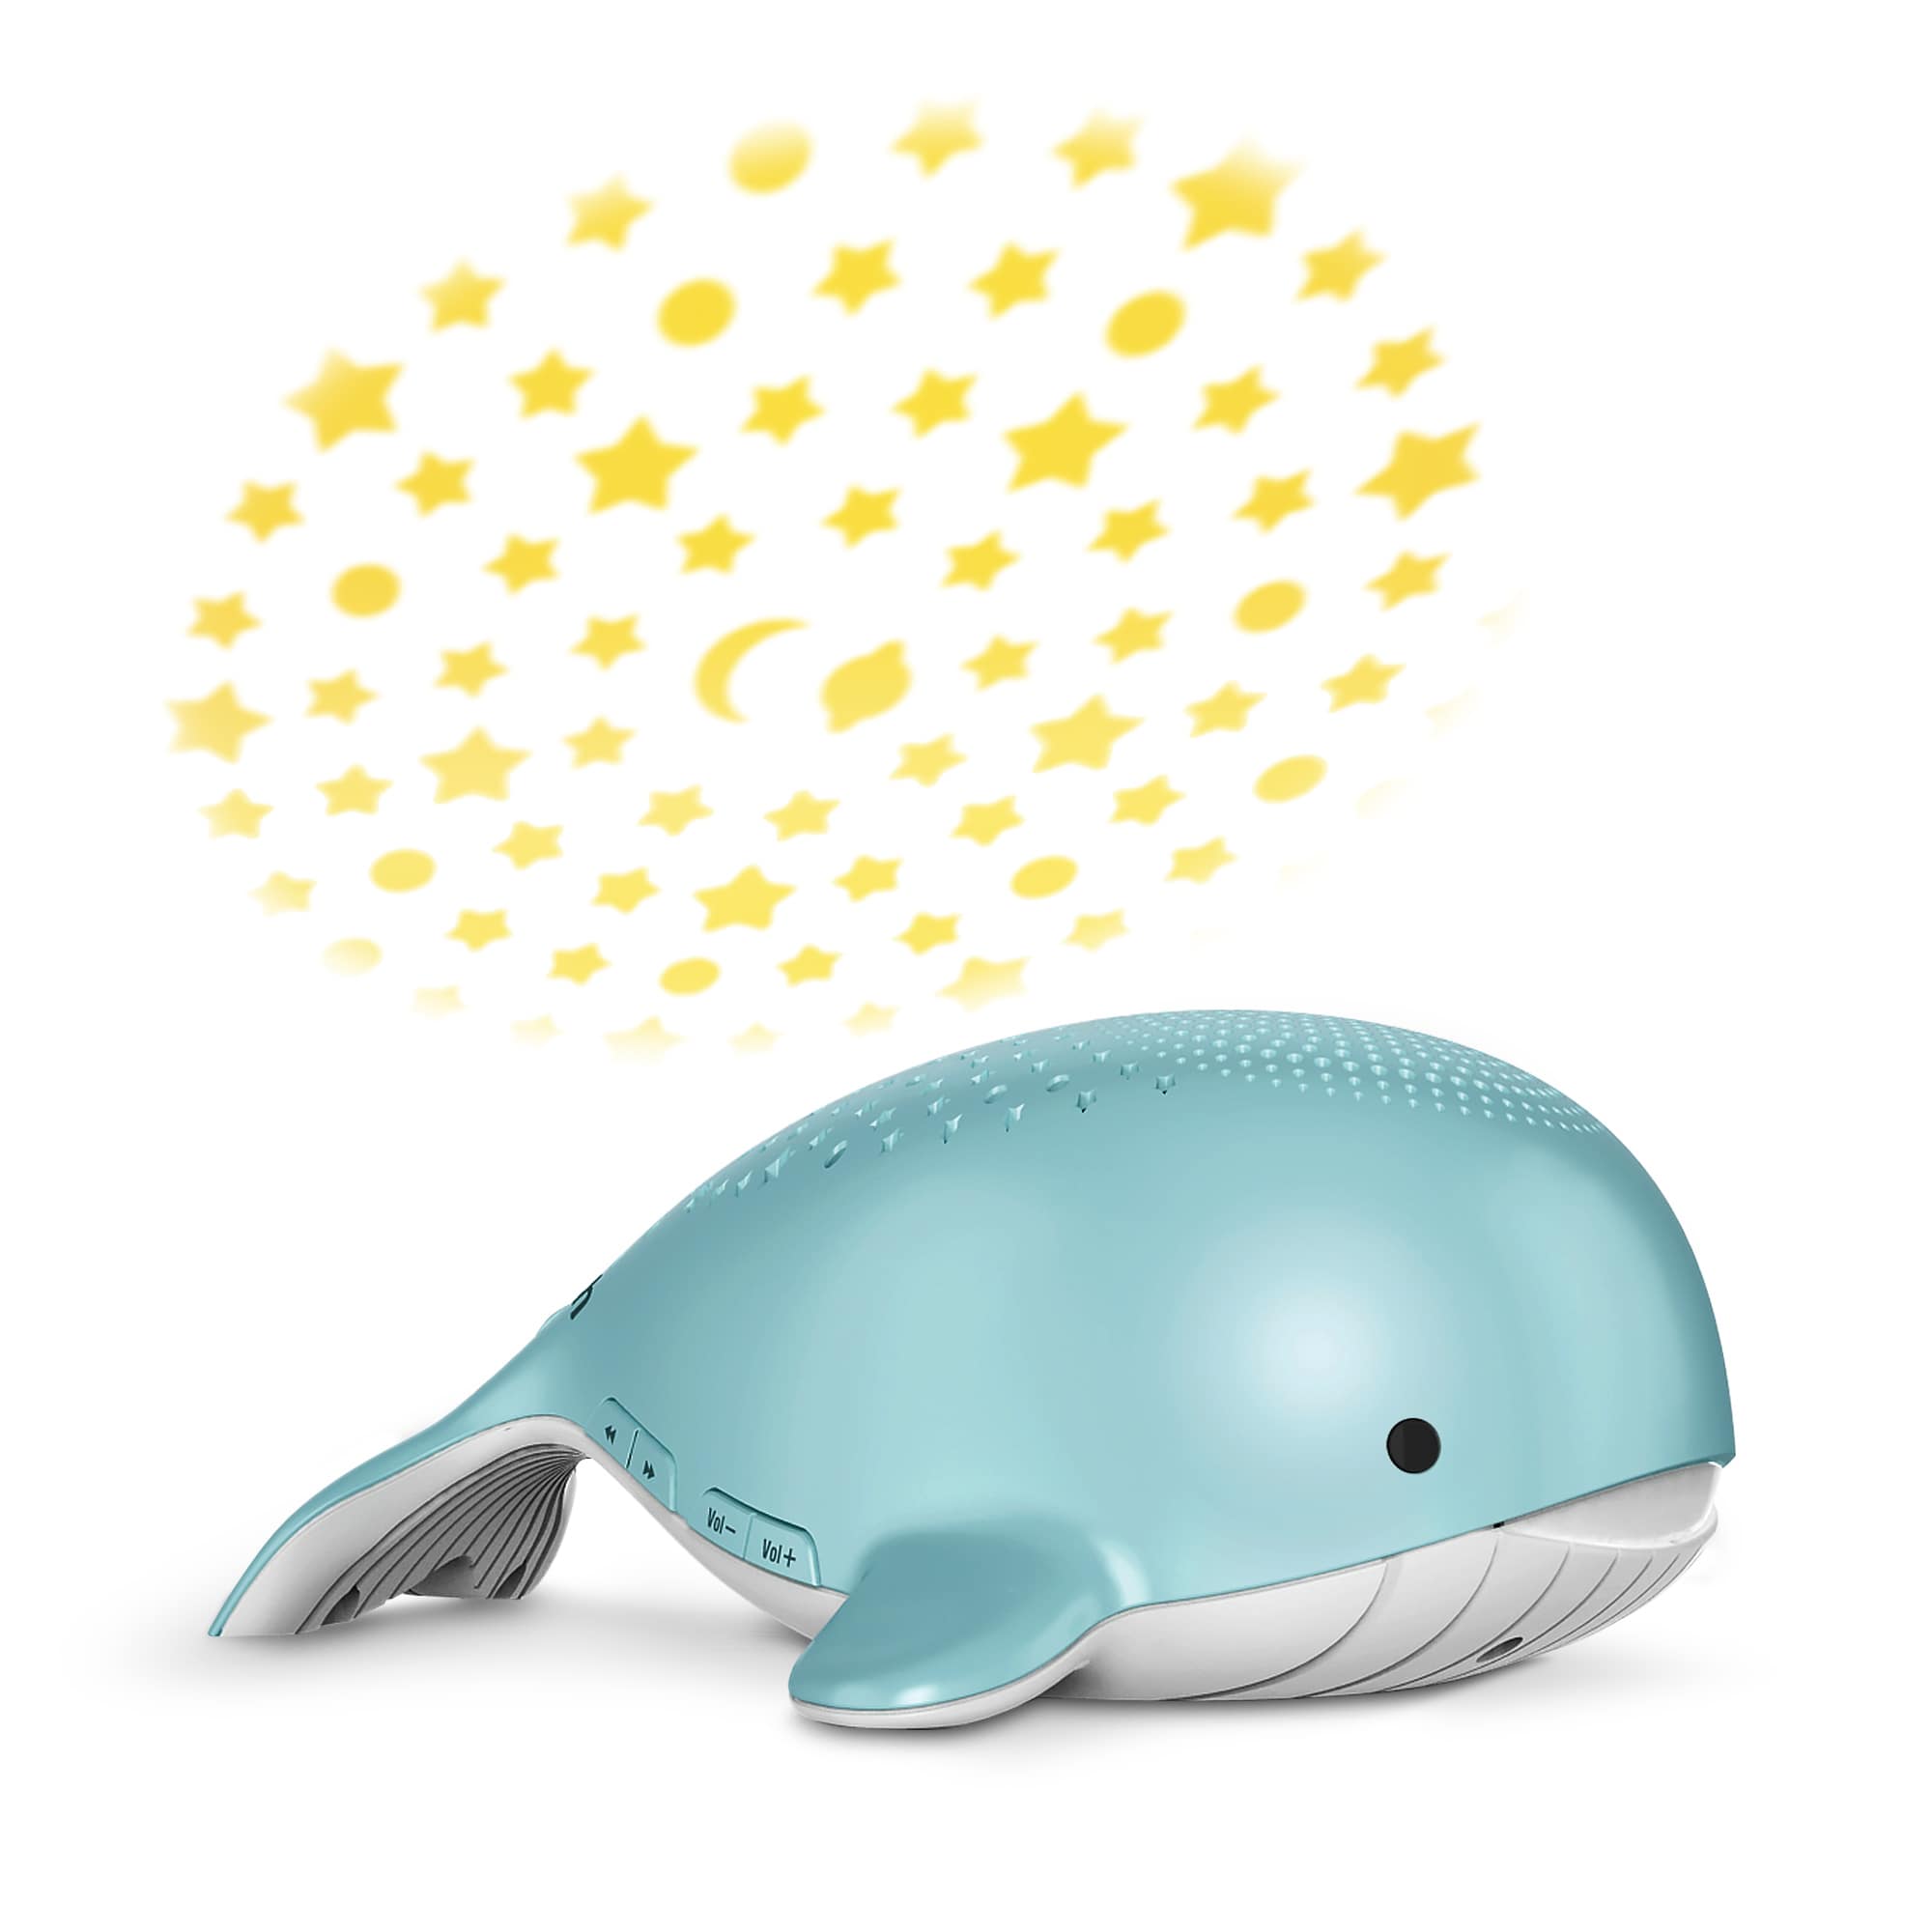 Wyatt the Whale&reg; Storytelling Soother